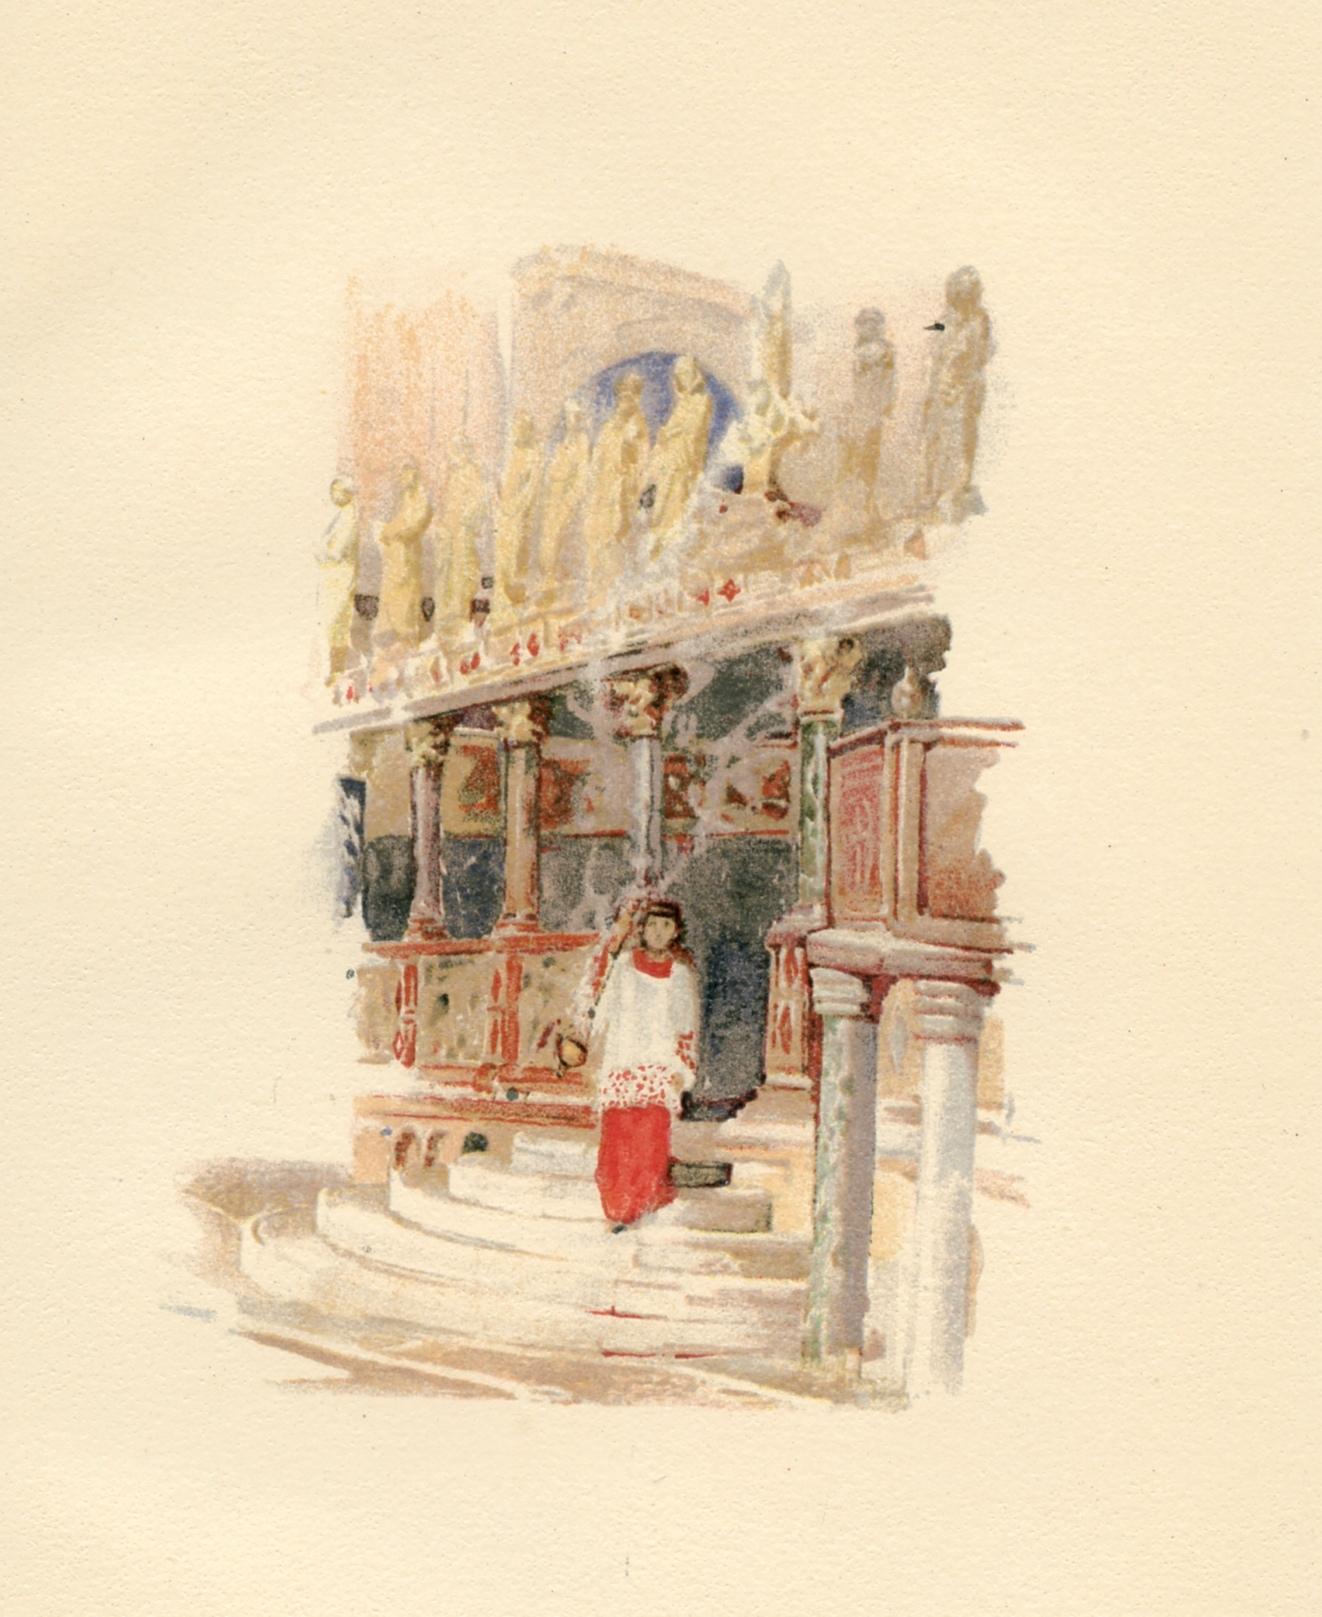 Medium: chromolithograph (after the watercolor). This delightful antique lithograph was published in a small edition in 1892 to illustrate a rare volume with scenes of Venetian life. A beautiful impression printed on cream wove paper. Image size: 3